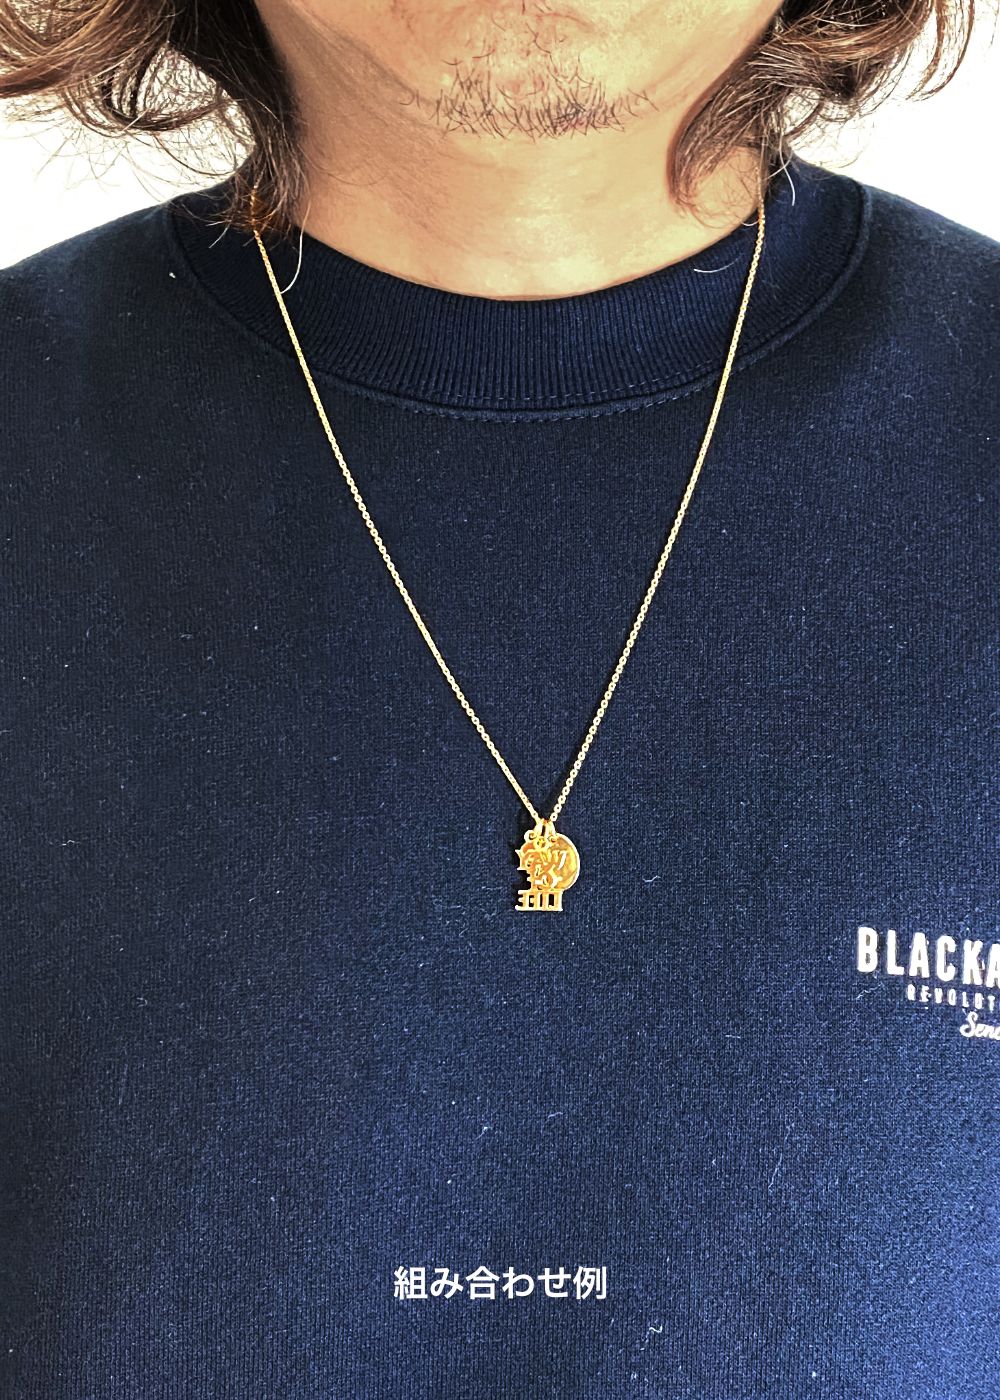 RATS - NECKLACE WAY OF LIFE 18K GOLD (GOLD) / ゴールド ネックレス 